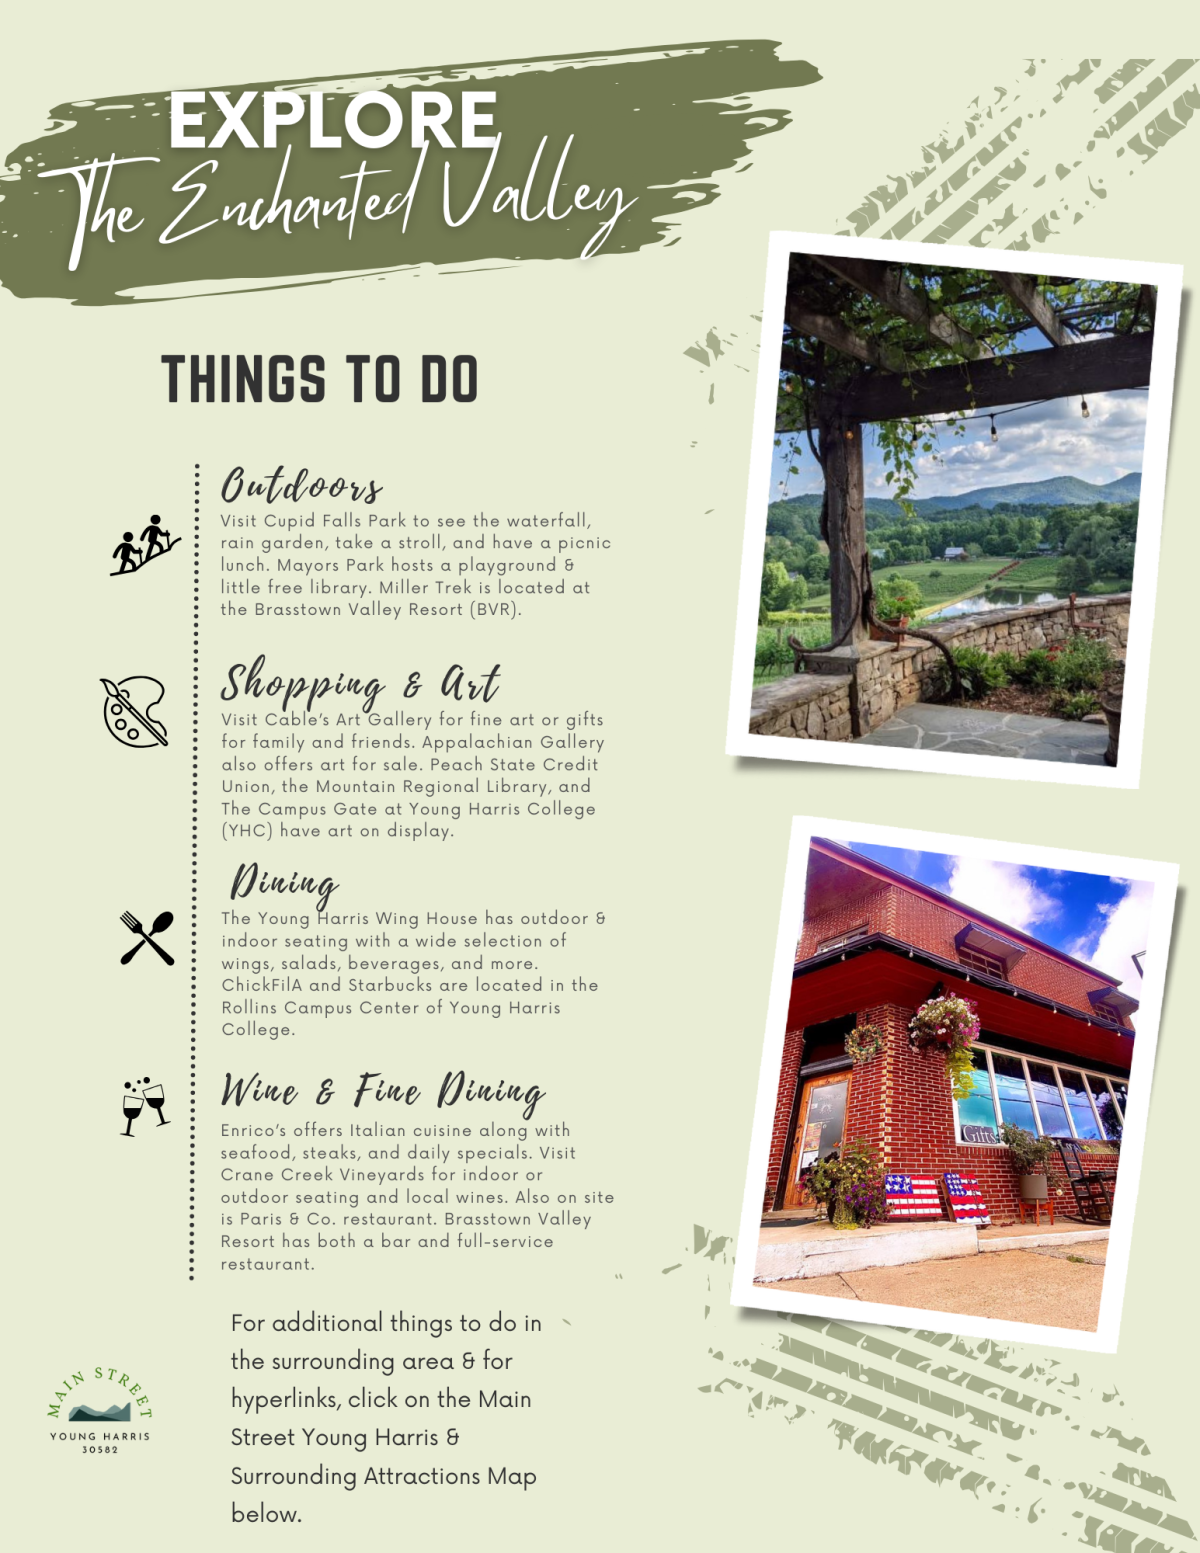 Visit The Enchanted Valley